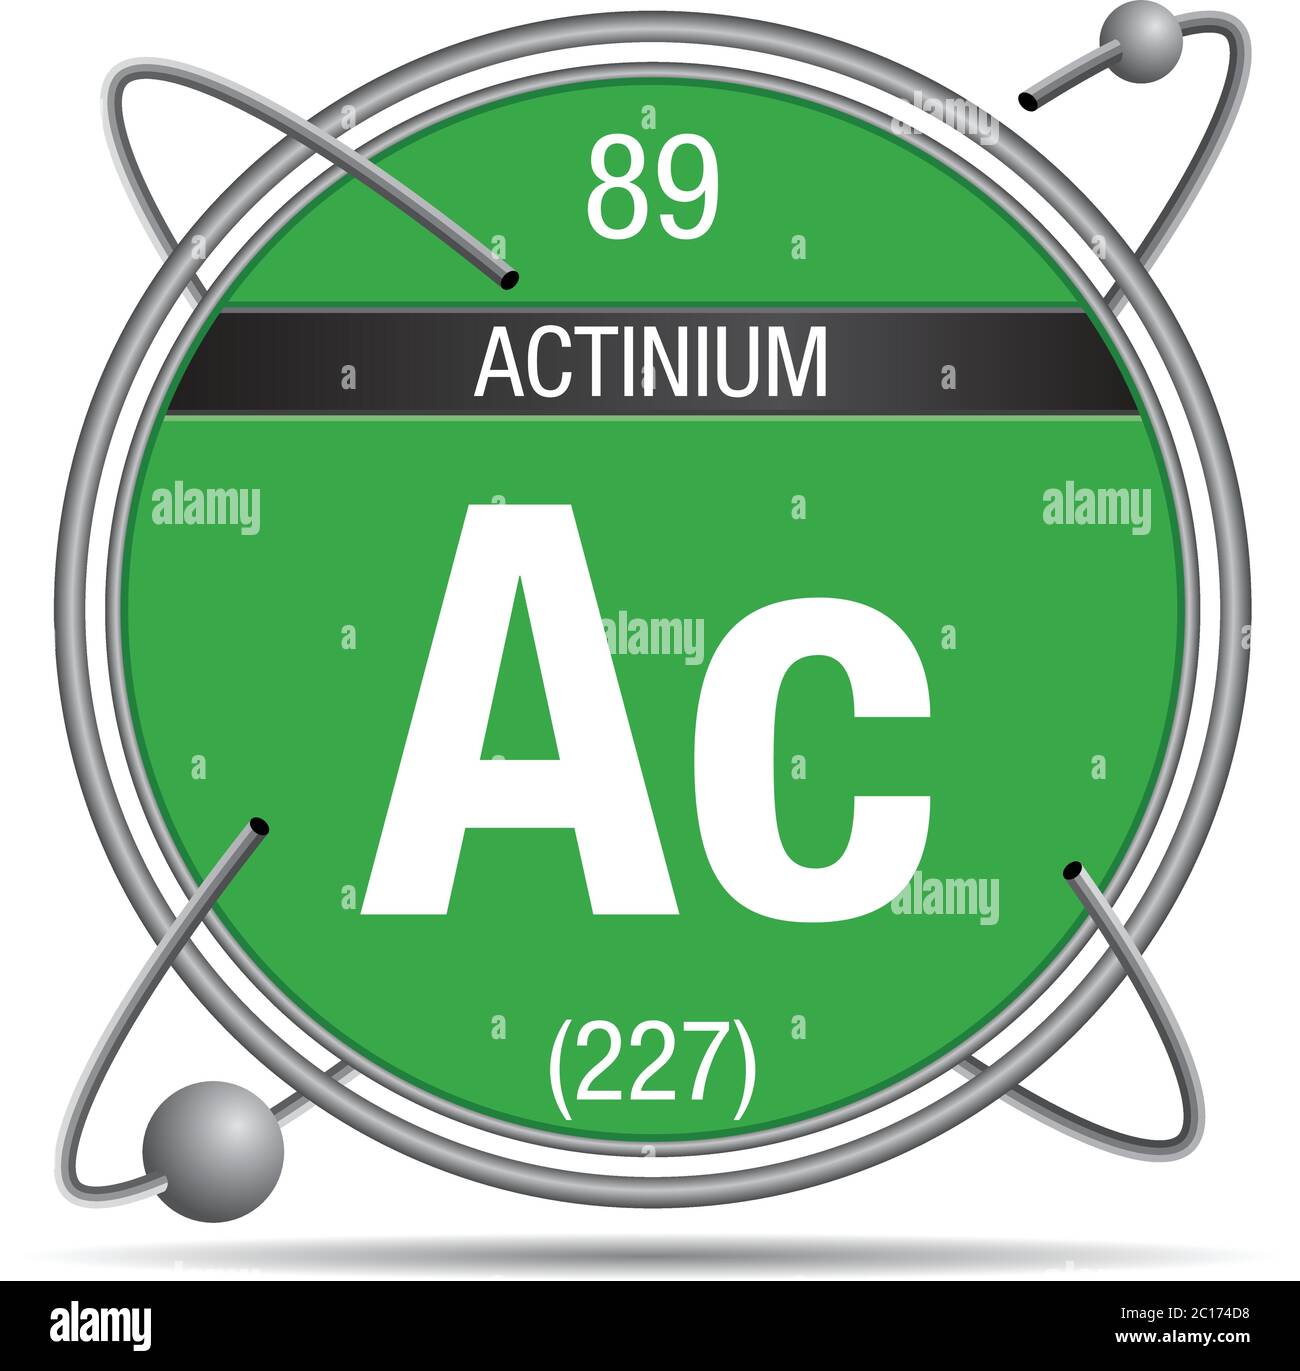 Actinium symbol inside a metal ring with colored background and spheres orbiting around. Element number 89 of the Periodic Table of the Elements Stock Vector